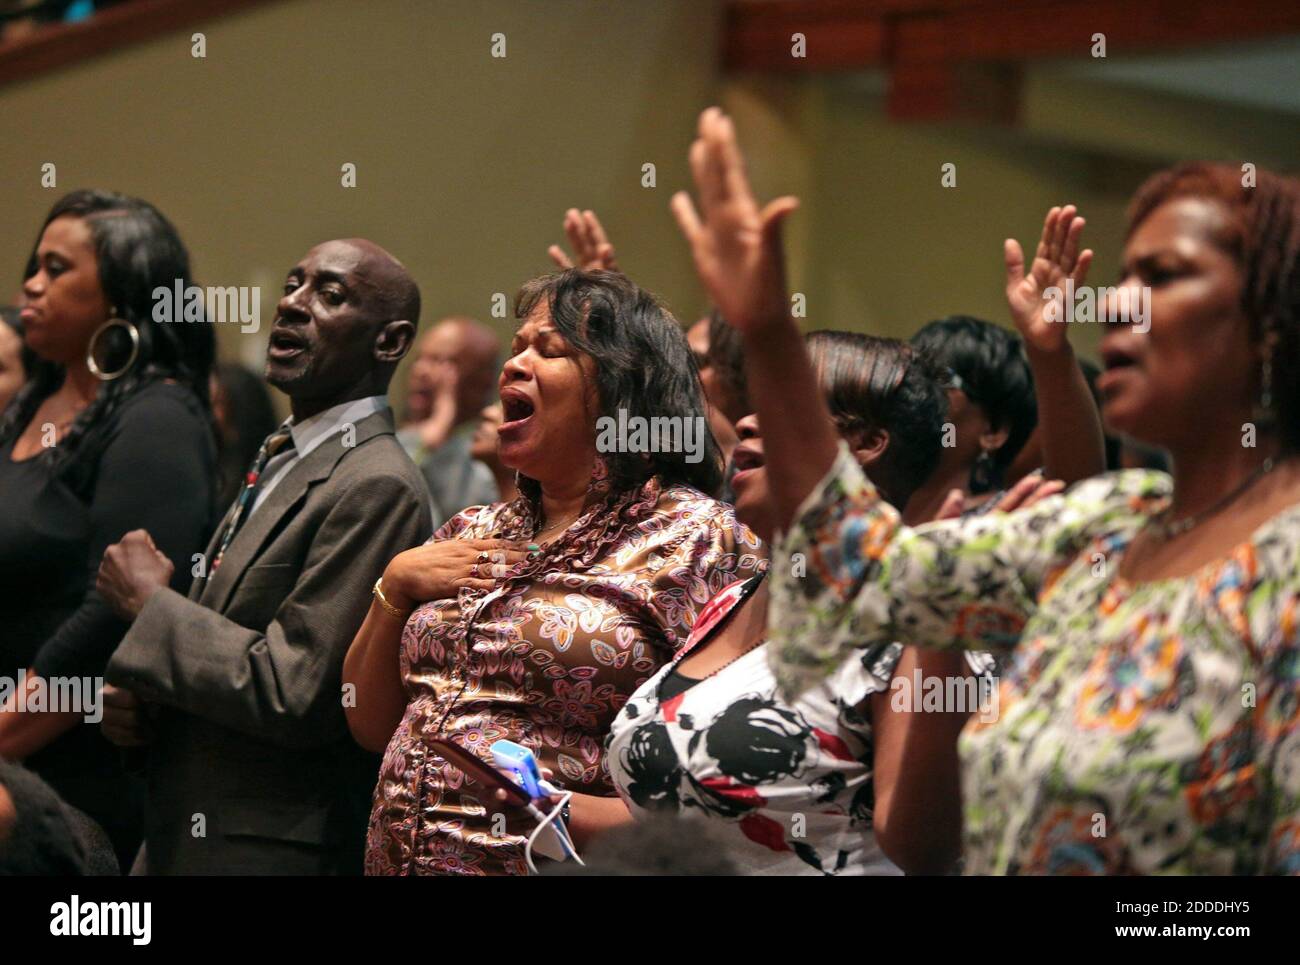 NO FILM, NO VIDEO, NO TV, NO DOCUMENTARY - People attending the funeral services for Michael Brown sing at Friendly Temple Missionary Baptist Church in St. Louis, MO, USA, on Monday, August 25, 2014. Photo by Robert Cohen/St. Louis Post-Dispatch/MCT/ABACAPRESS.COM Stock Photo